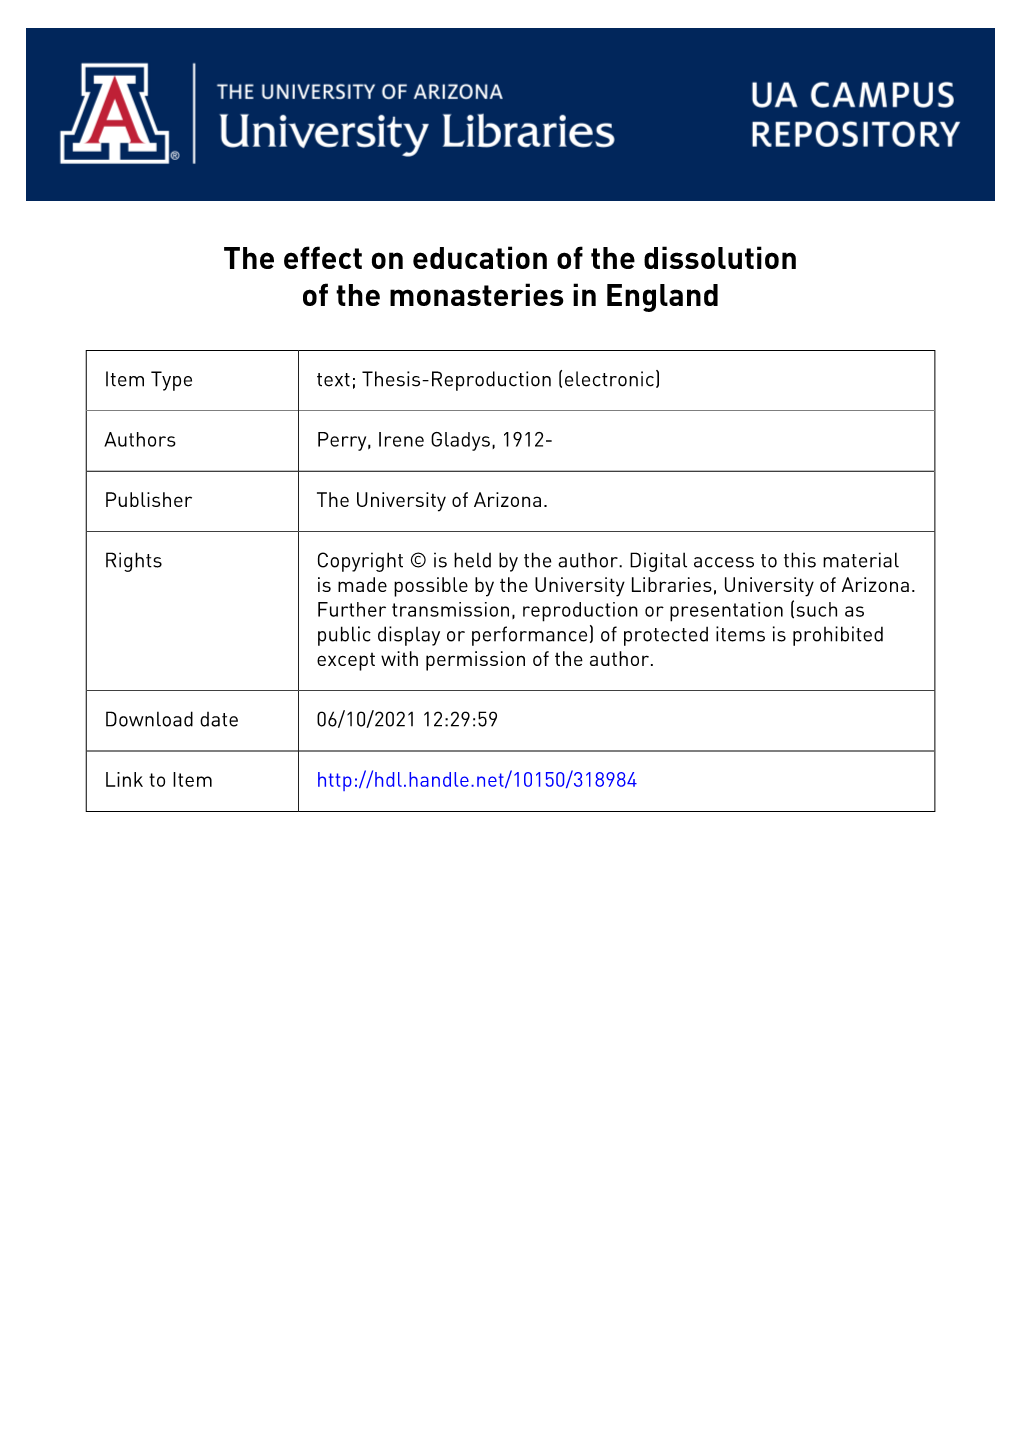 The Effect on Education of the Dissolution of the Monasteries in England